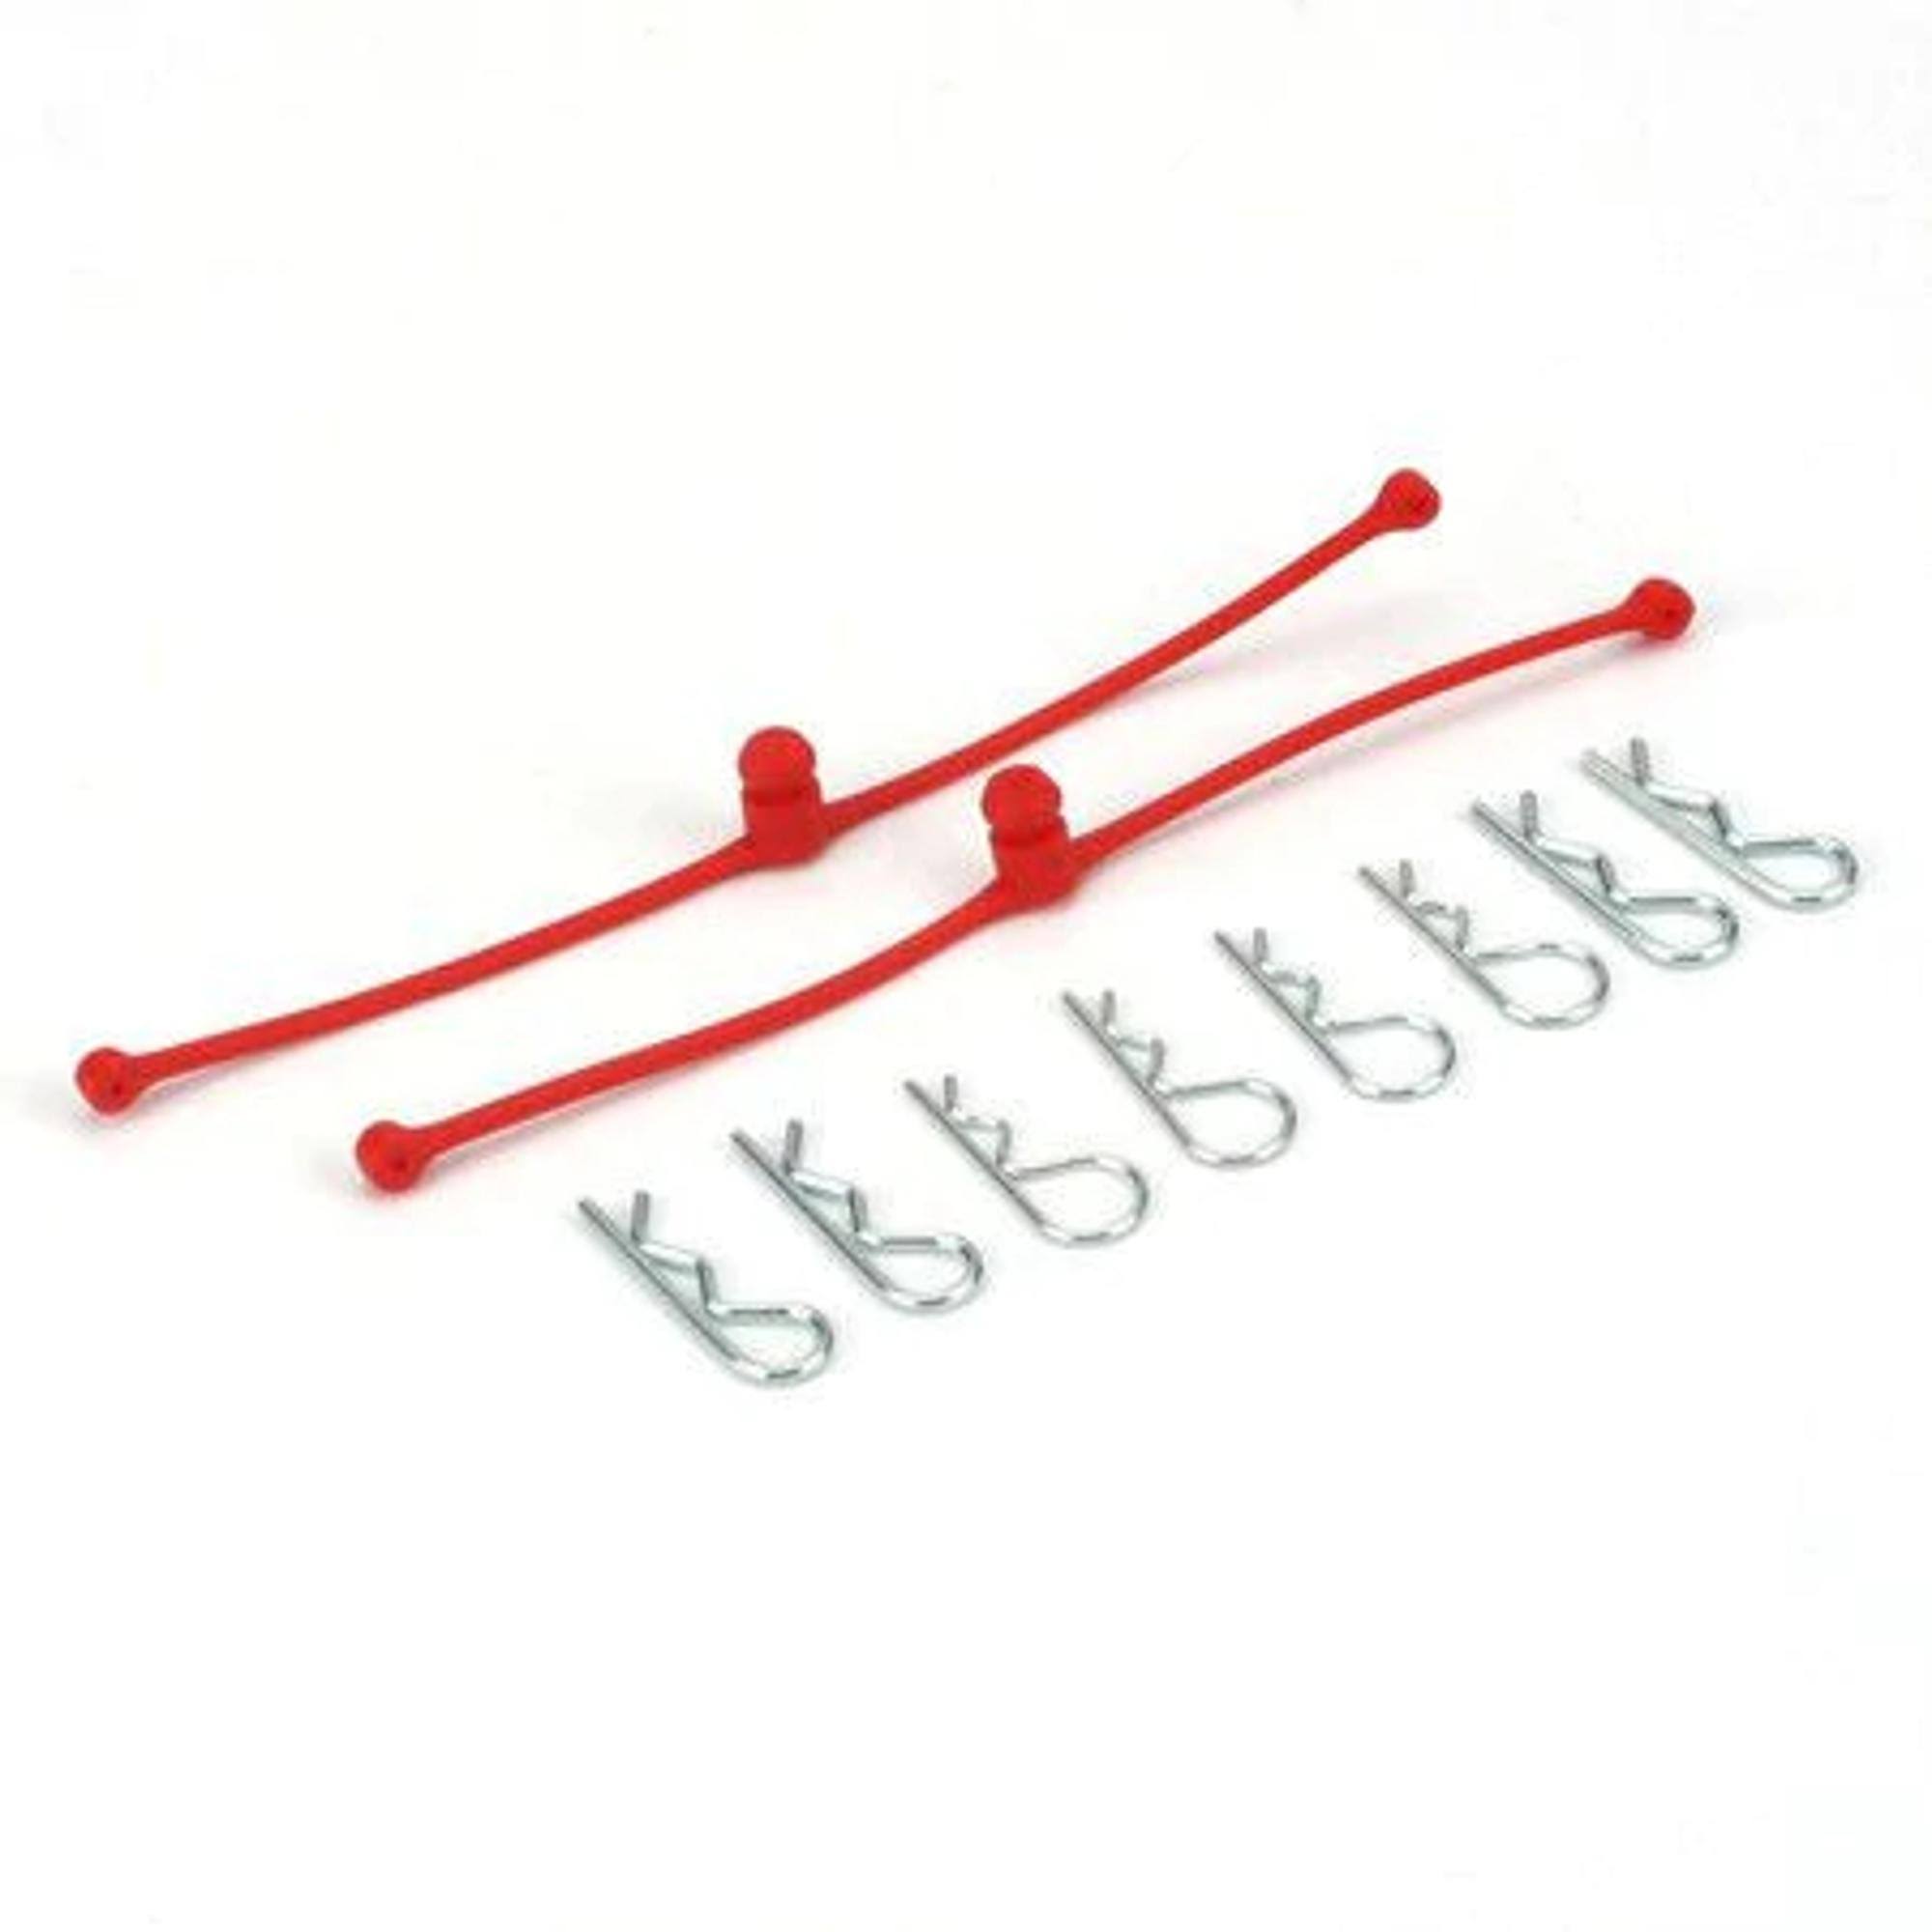 DuBro Body Klip Retainers - Red, 2pcs